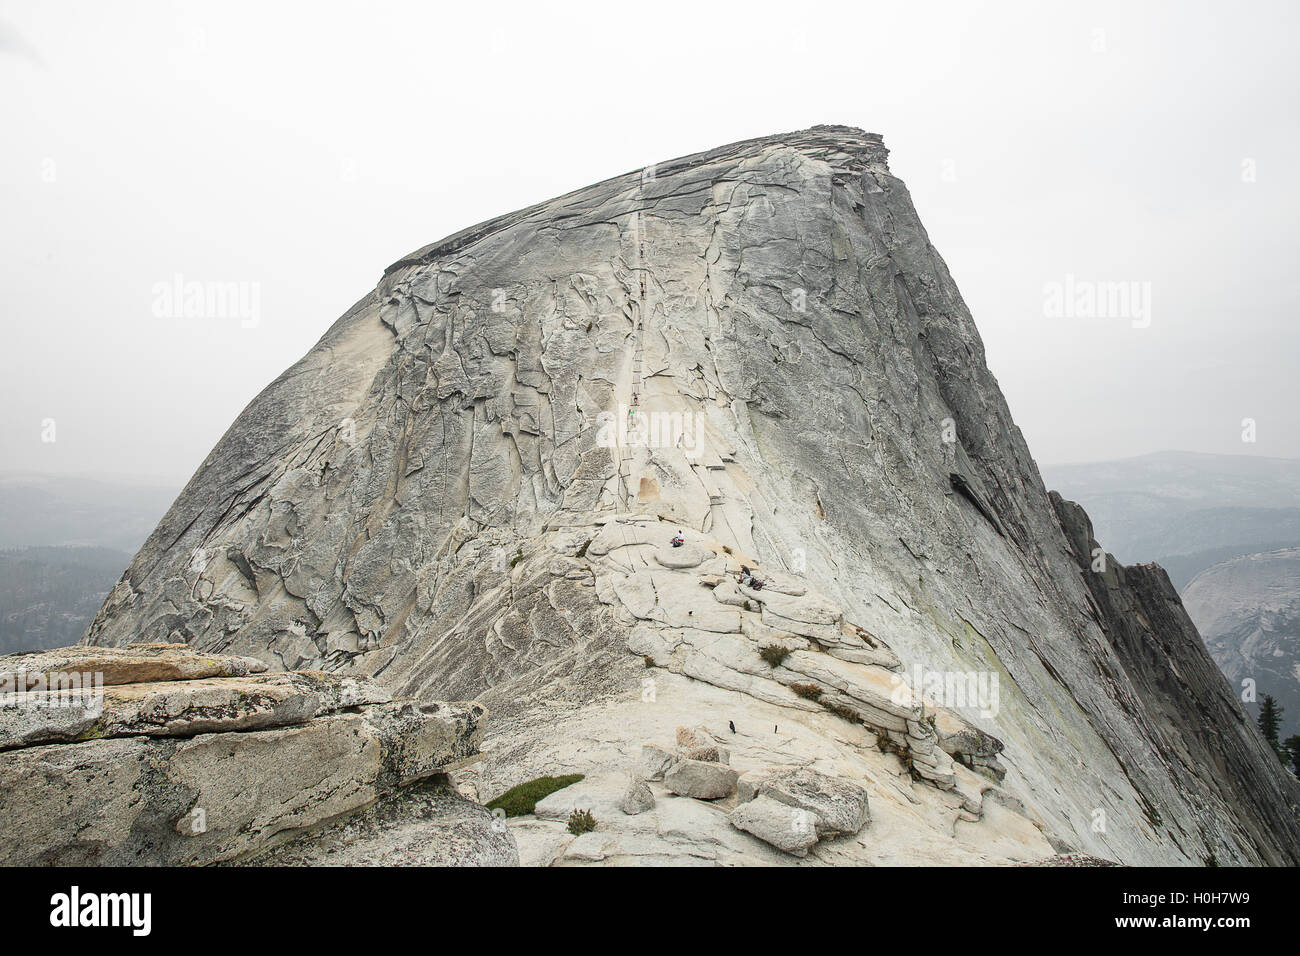 Hikers make their way up Yosemite's Half Dome, making sure to hold to the safety chain. Stock Photo